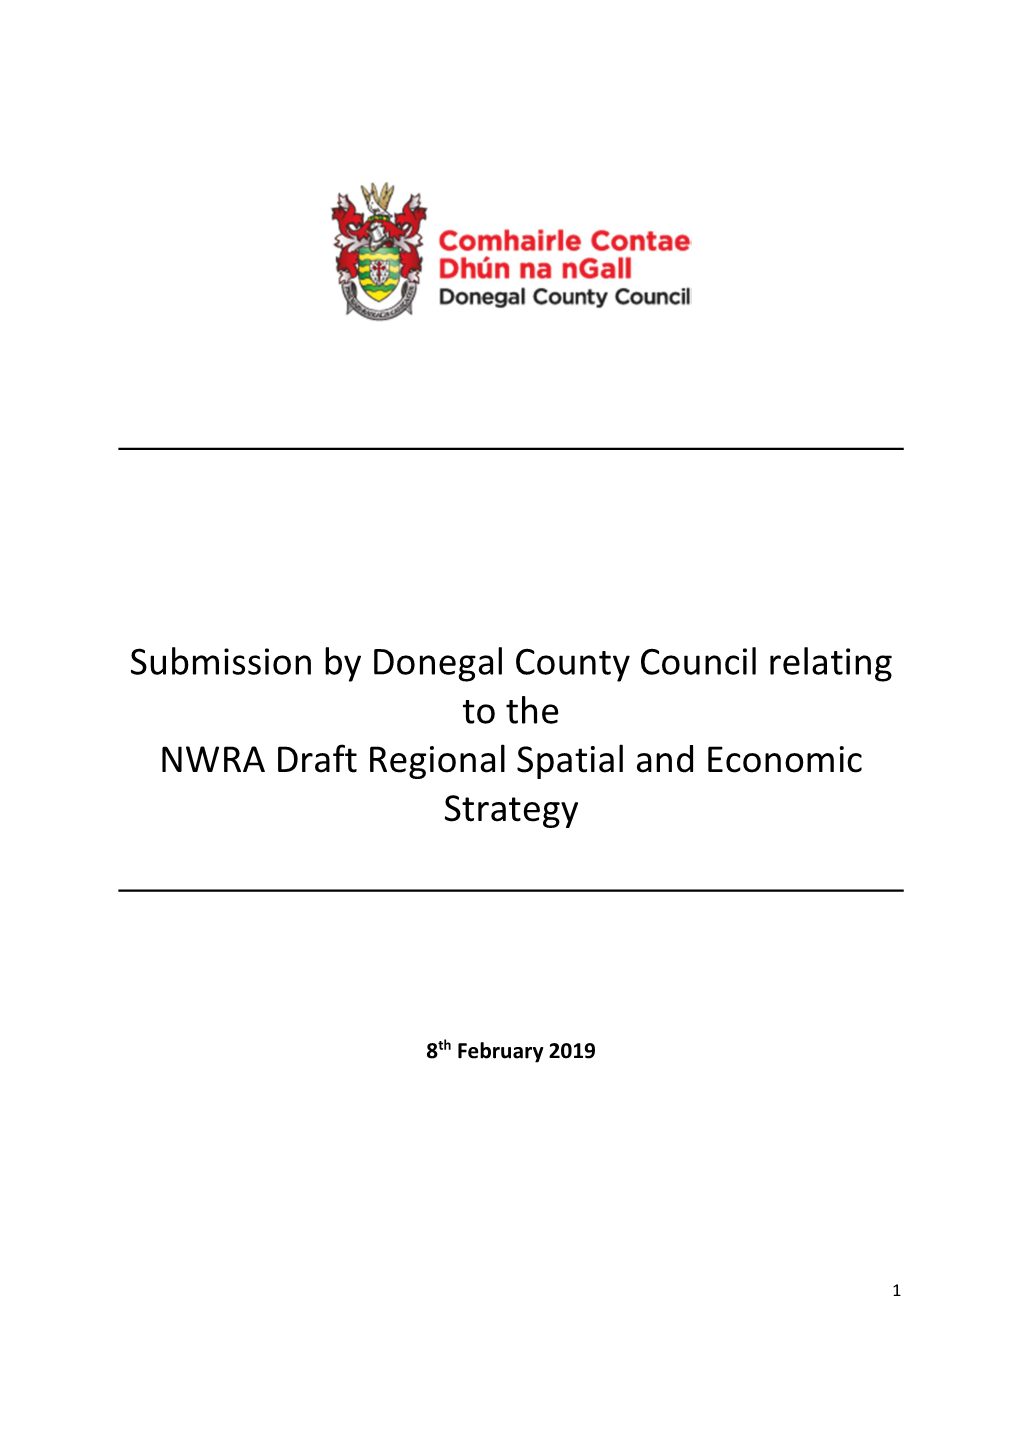 Submission by Donegal County Council Relating to the NWRA Draft Regional Spatial and Economic Strategy